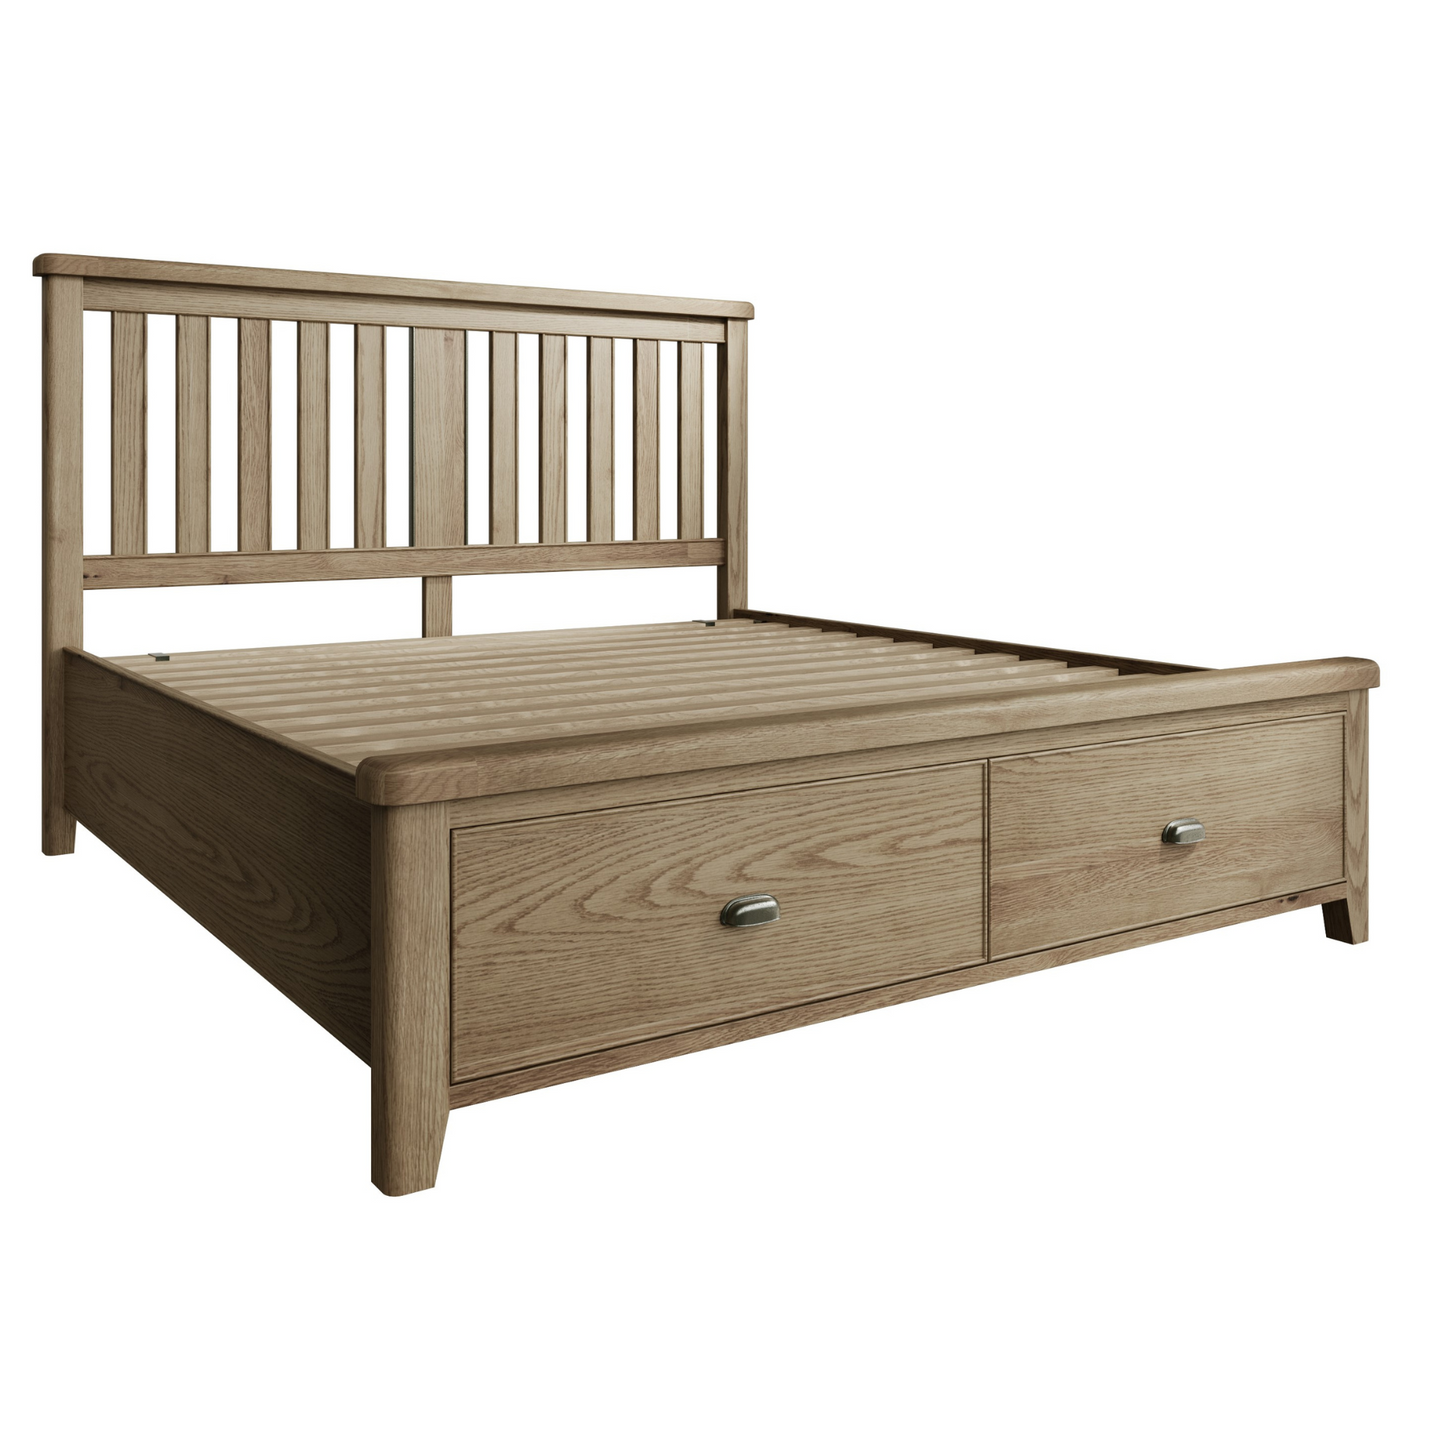 Horner Wooden Headboard with Drawer Base Beds